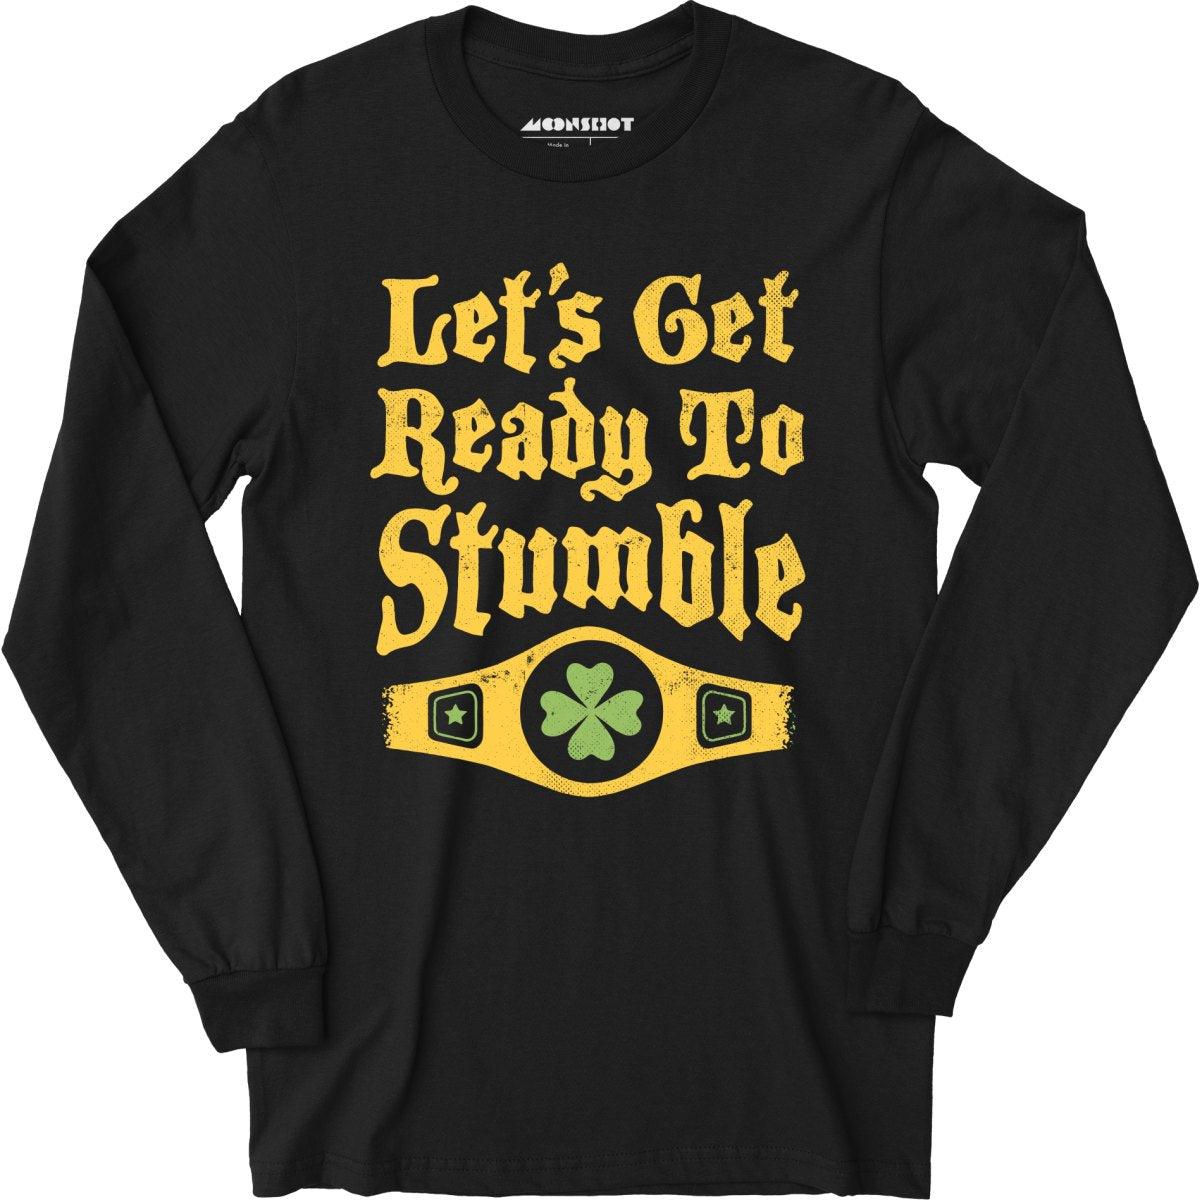 Let's Get Ready to Stumble - Long Sleeve T-Shirt